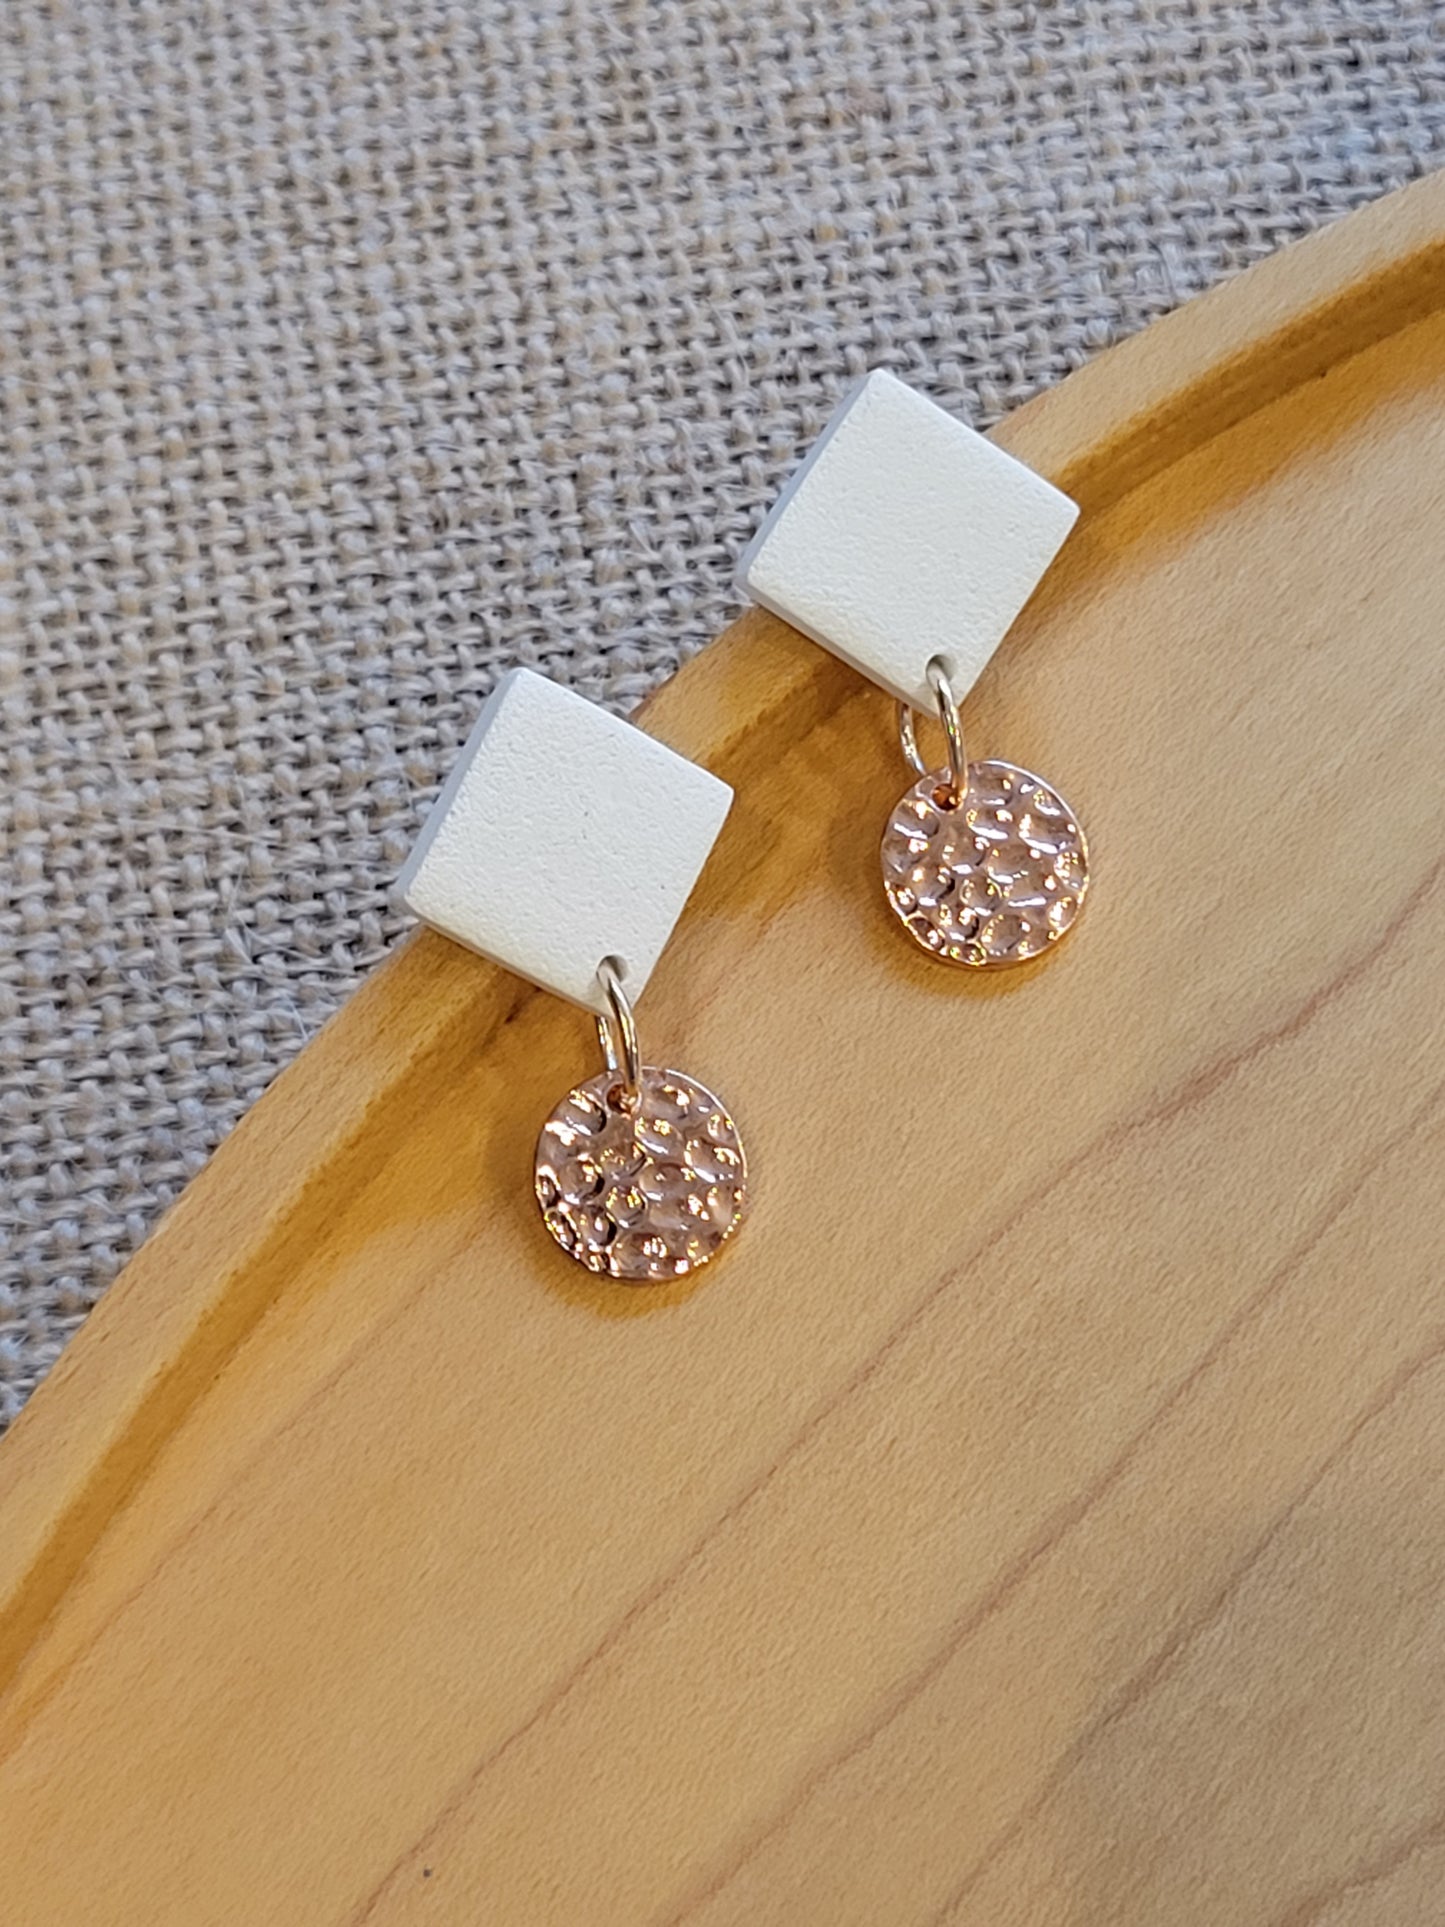 Rose Gold and White Earrings